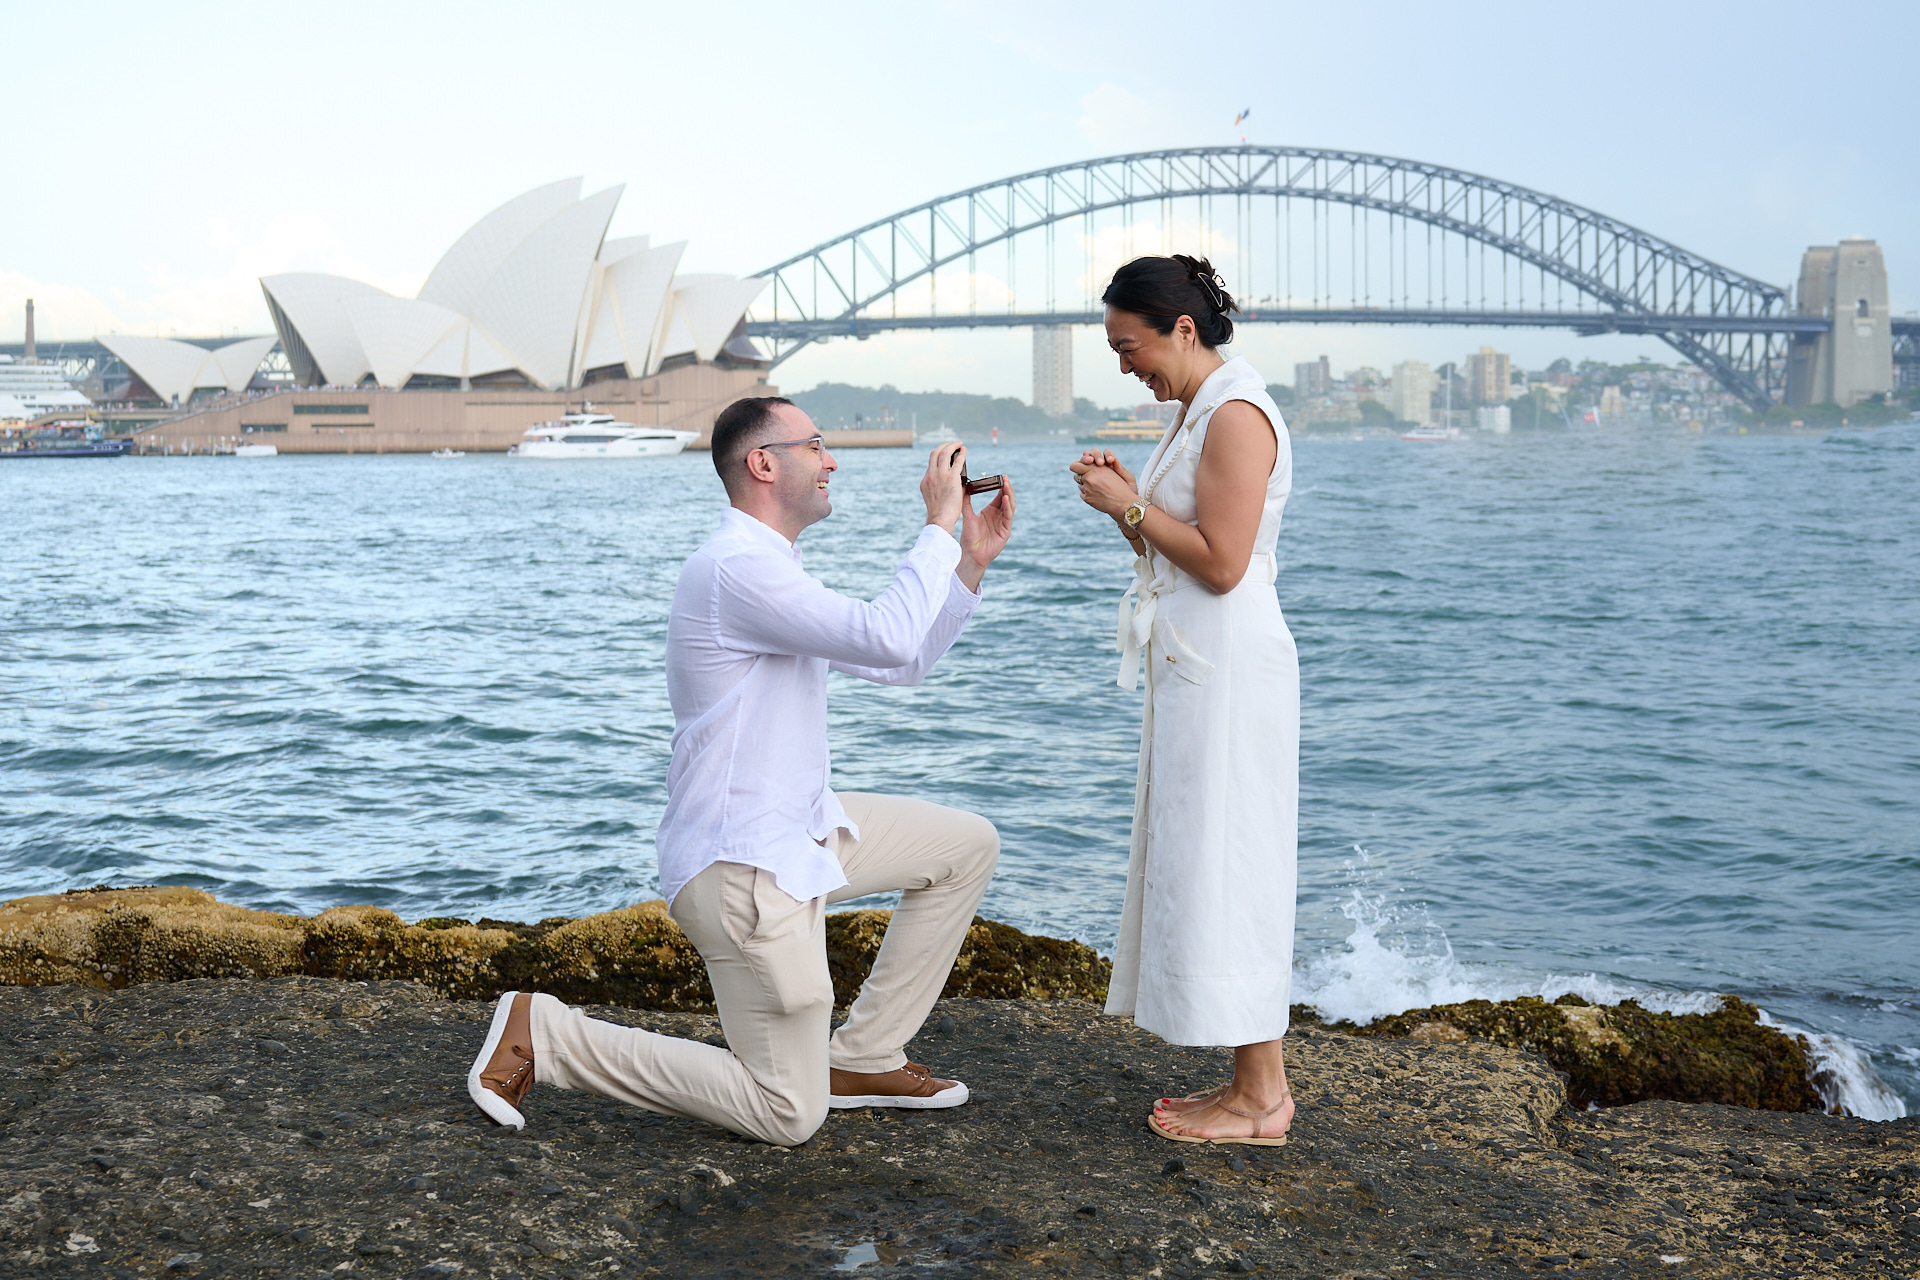 Sydney Opera House and Harbour Bridge background for Marriage Proposal. Photography By orlandosydney.com